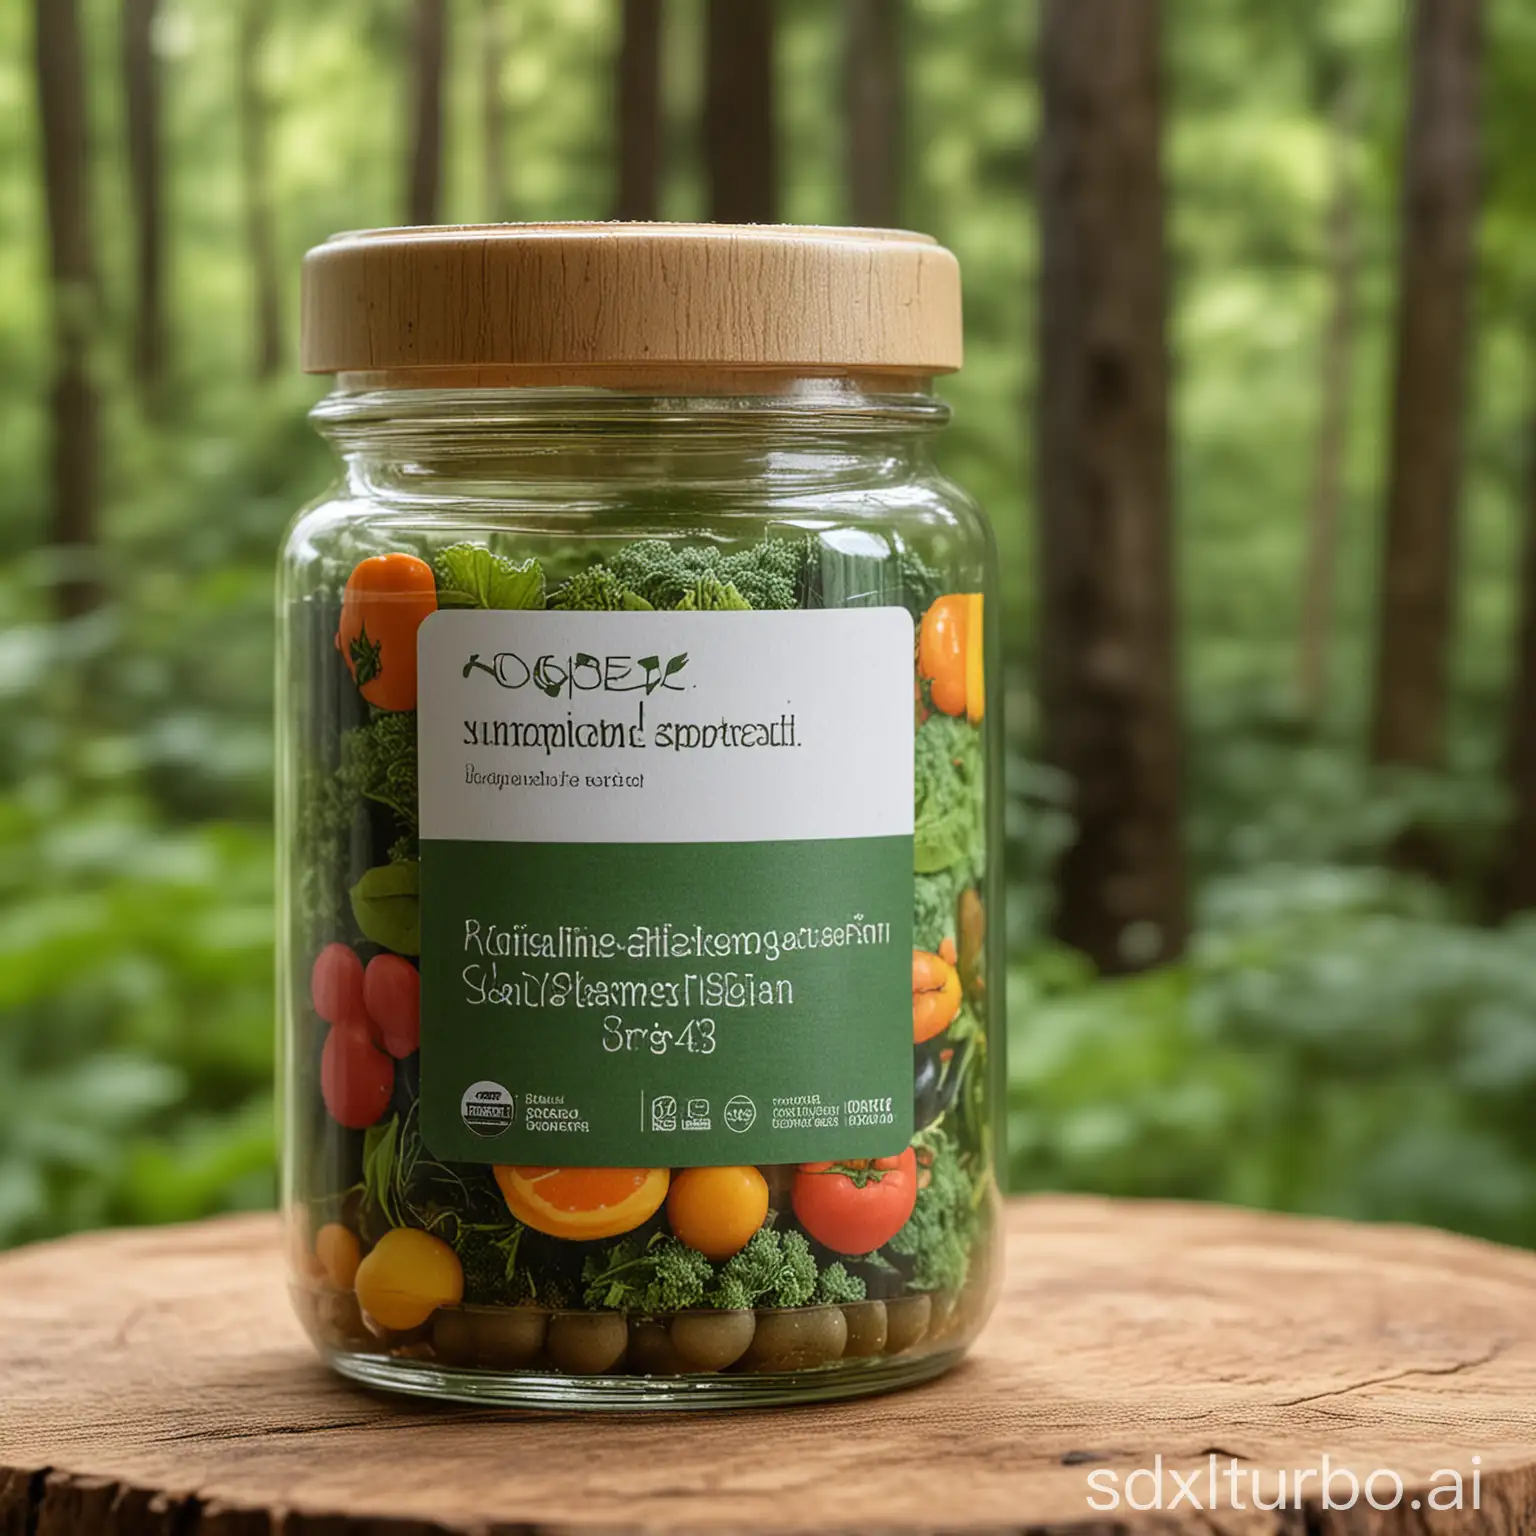 A close-up of a pack of brightly colored, organic superfood supplements. The supplements are in a glass jar with a wooden lid. The background is a blurred image of a lush, green forest.